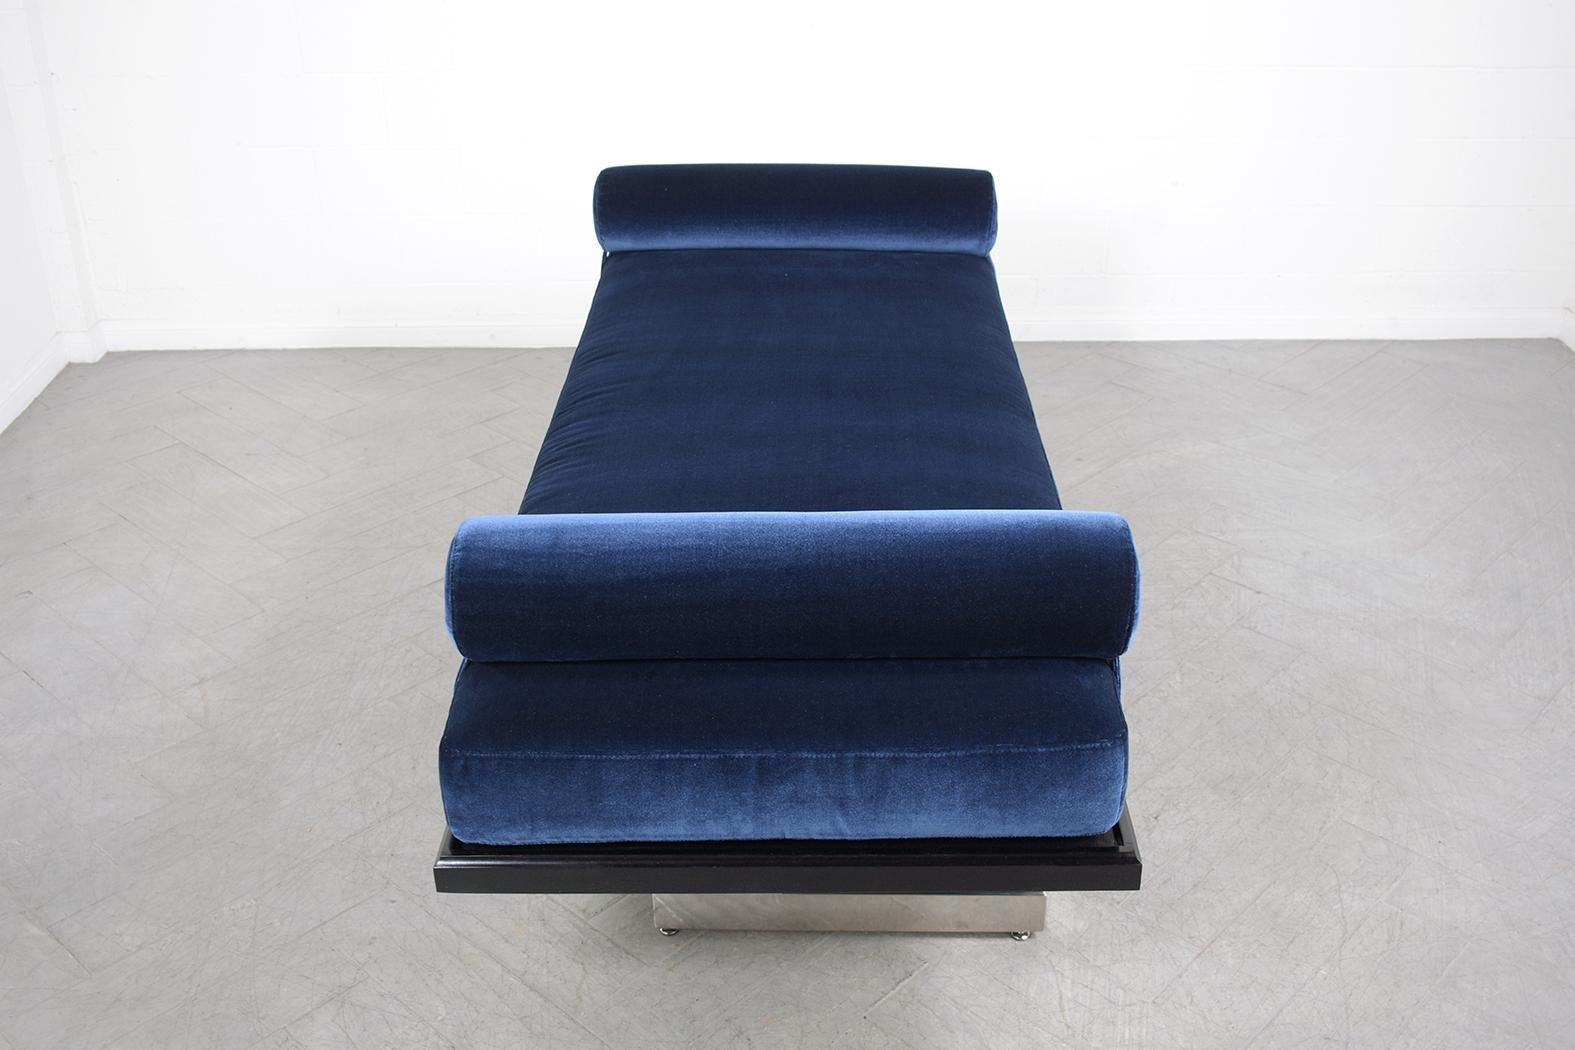 Mid-20th Century Restored Mid-Century Modern Daybed in Navy Blue Velvet with Chrome Steel Base For Sale